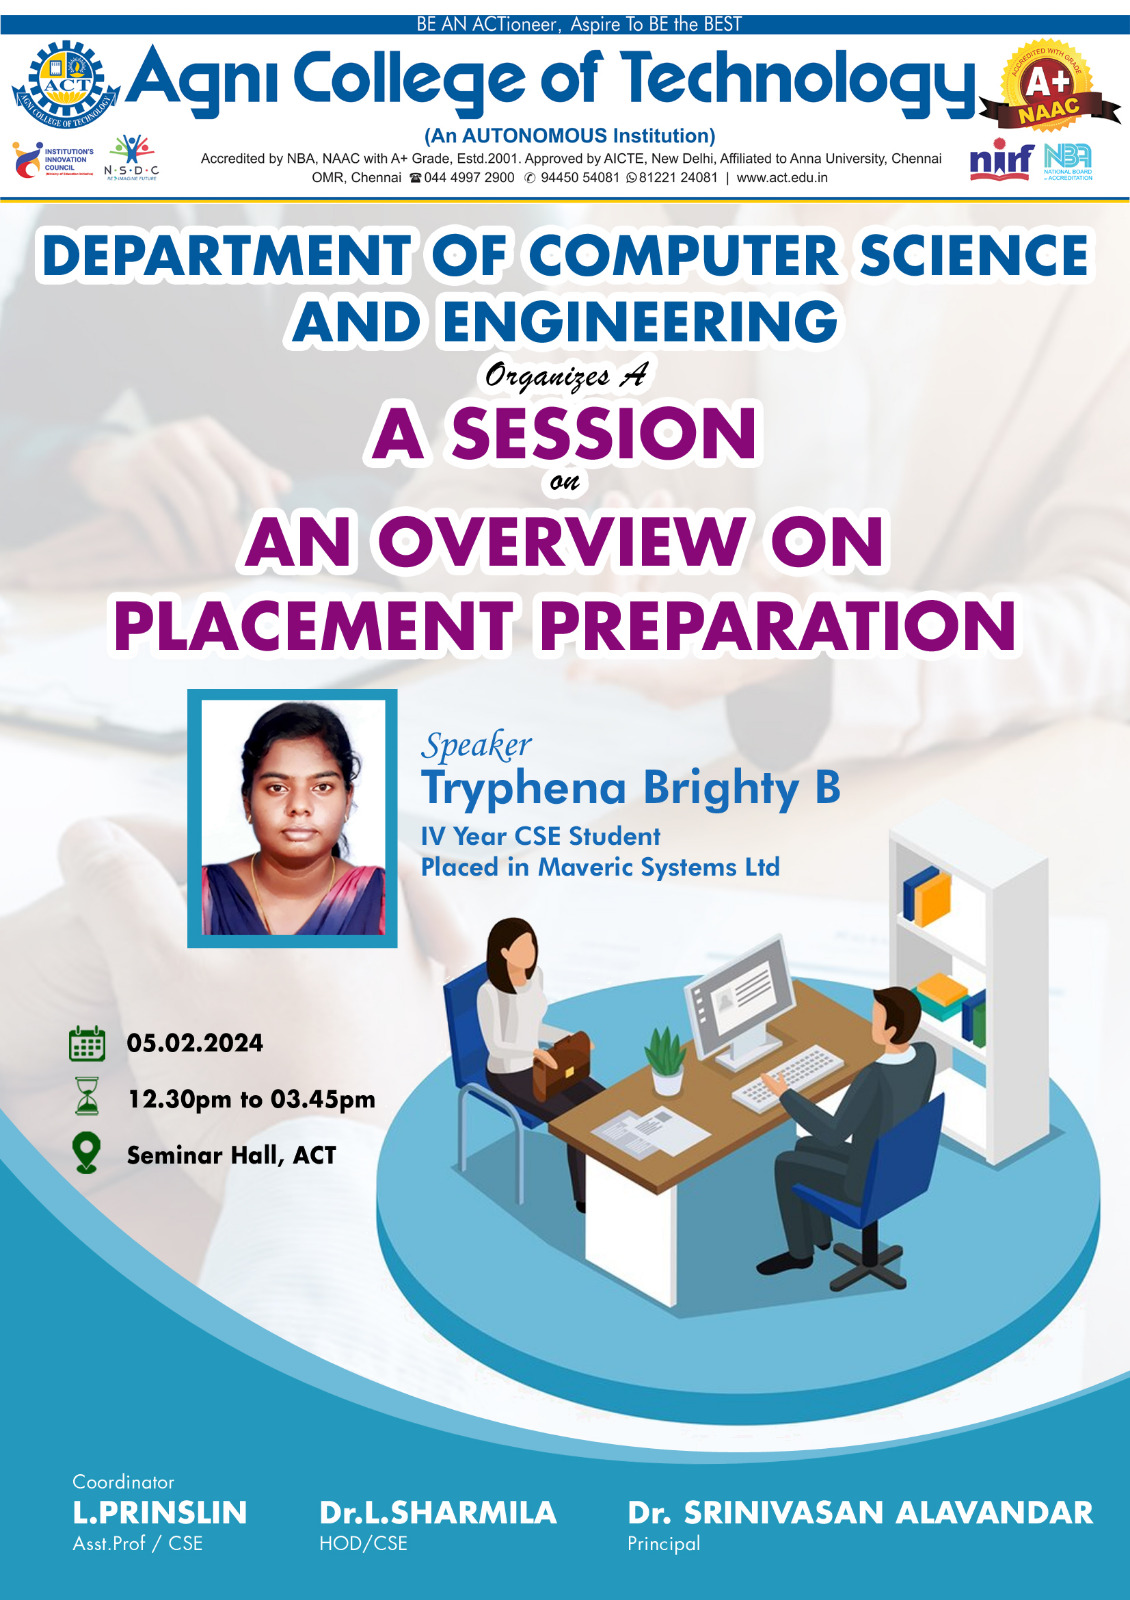 A Session on An Overview on Placement Preparation